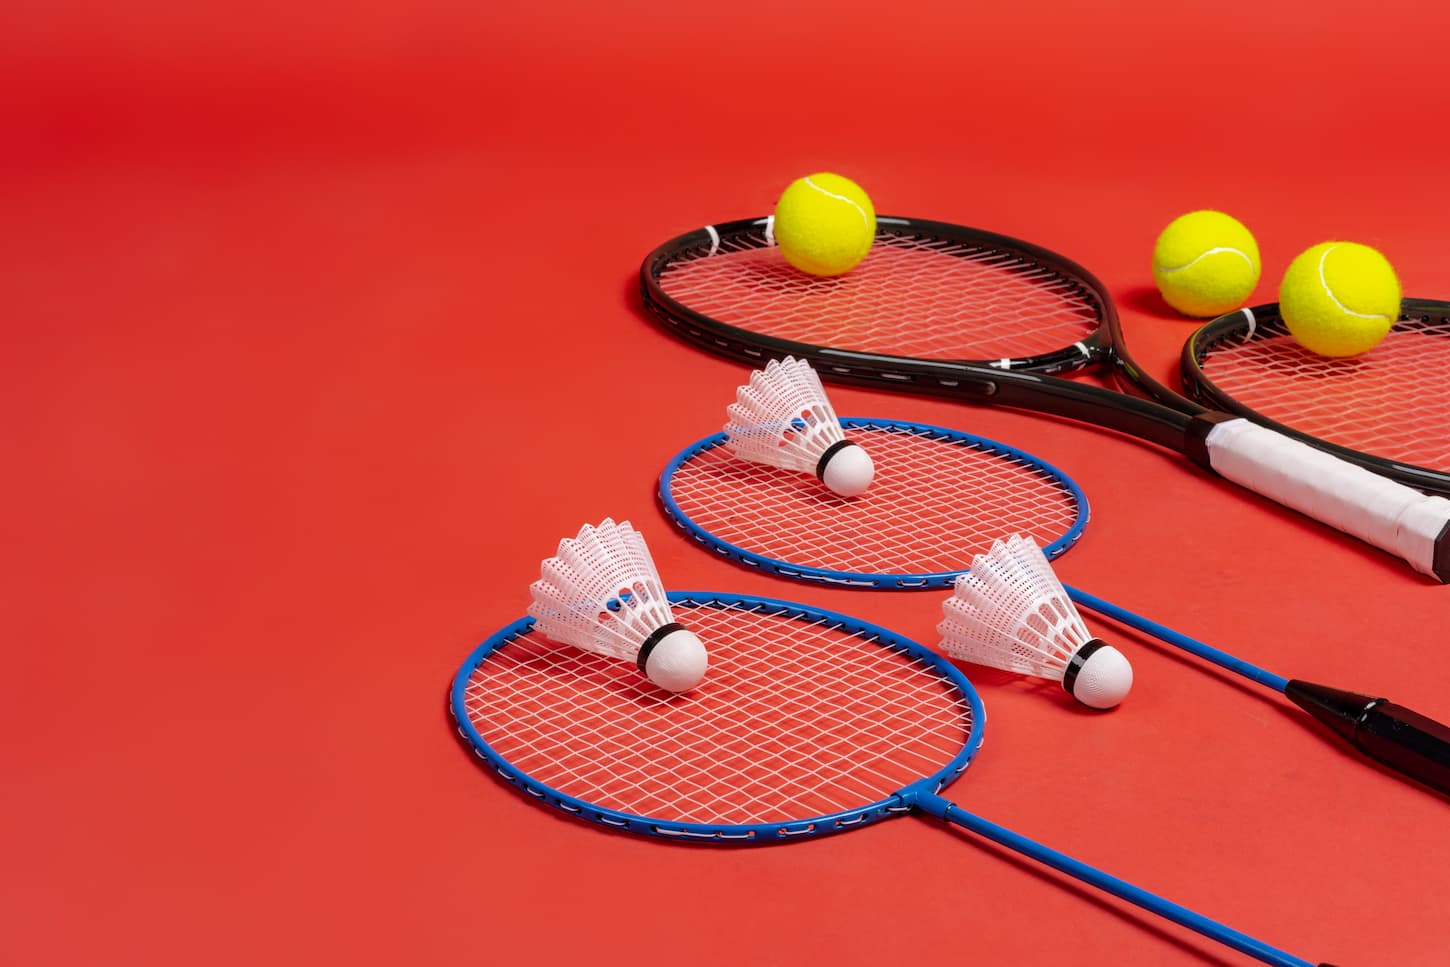 An image of rackets for tennis and for badminton.